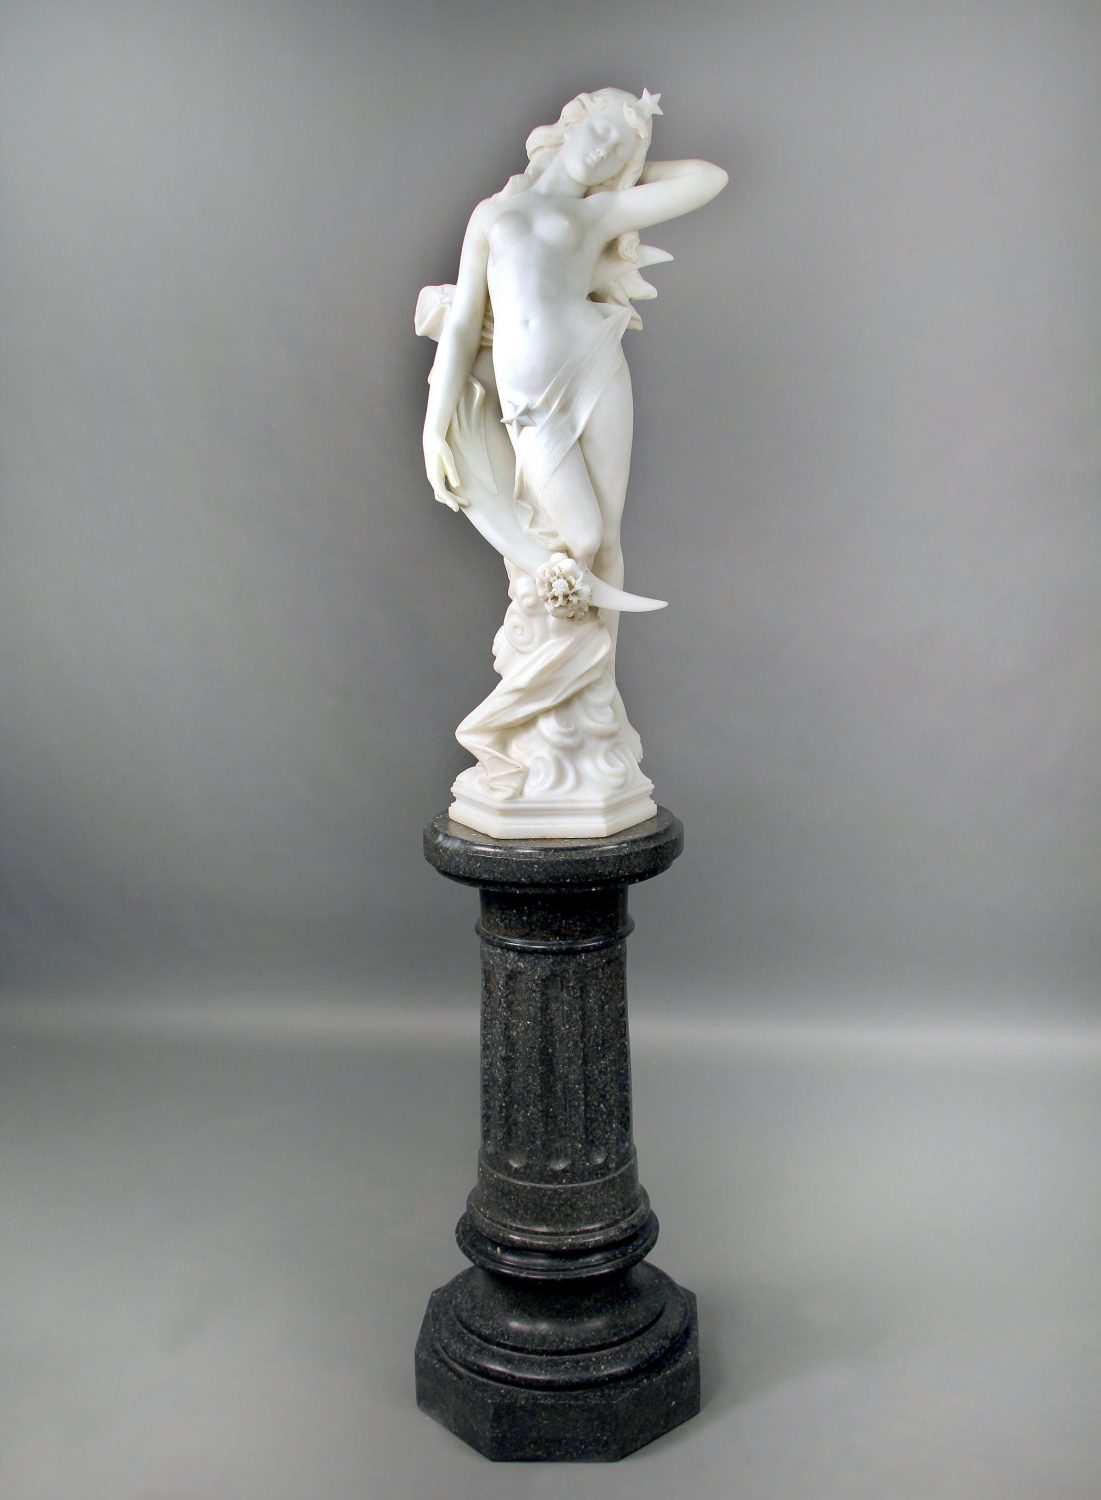 A Lovely Late 19th Century Italian White Carrara Marble of a Nude Woman On a  Pedestal Entitled La Notte By Ferdinando Batelli - Charles Cheriff  Galleries